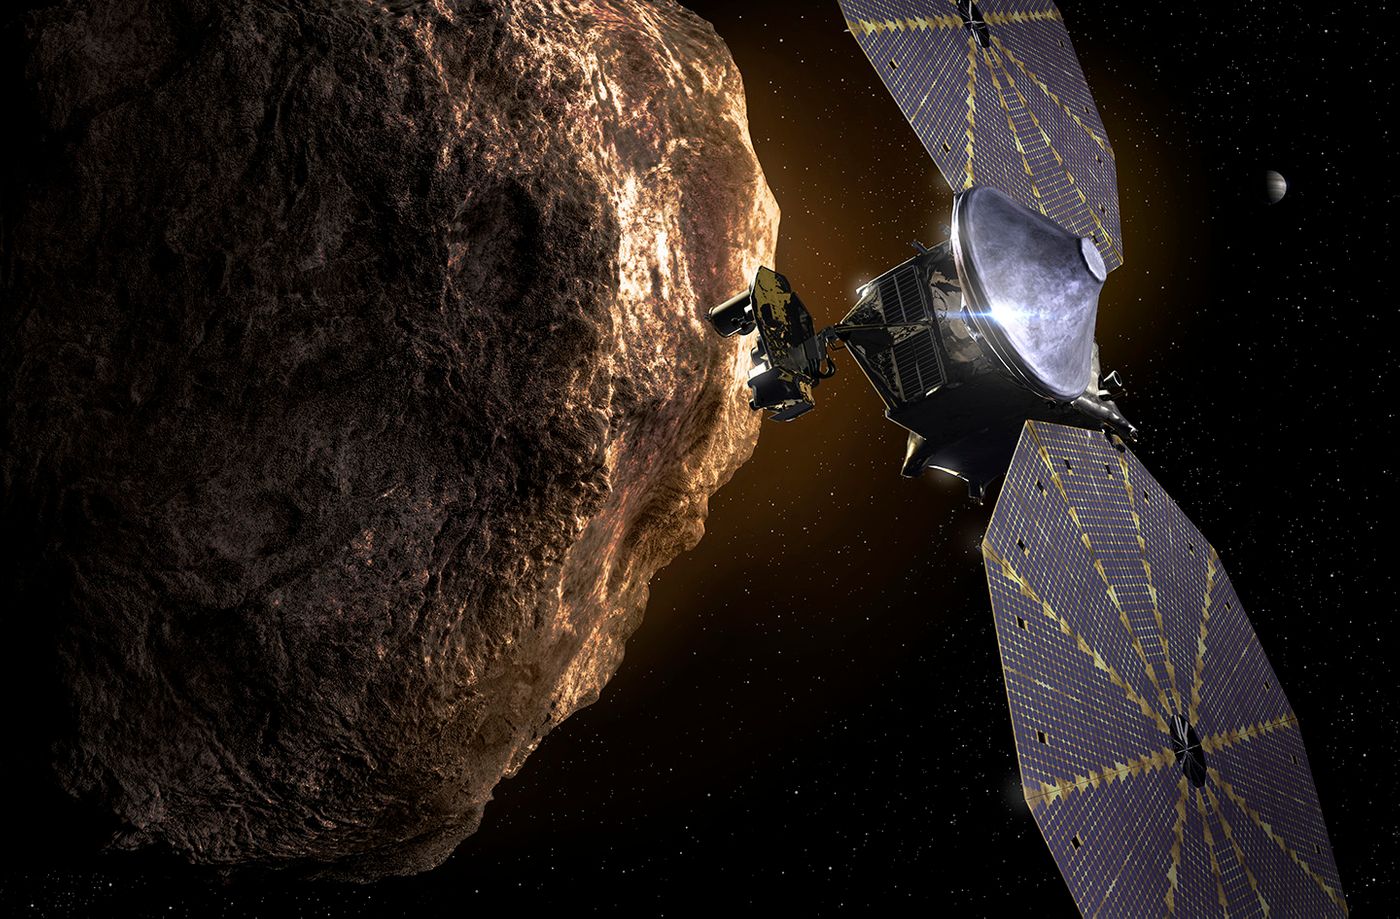 An artist's rendition of the Lucy spacecraft visiting a distant asteroid.